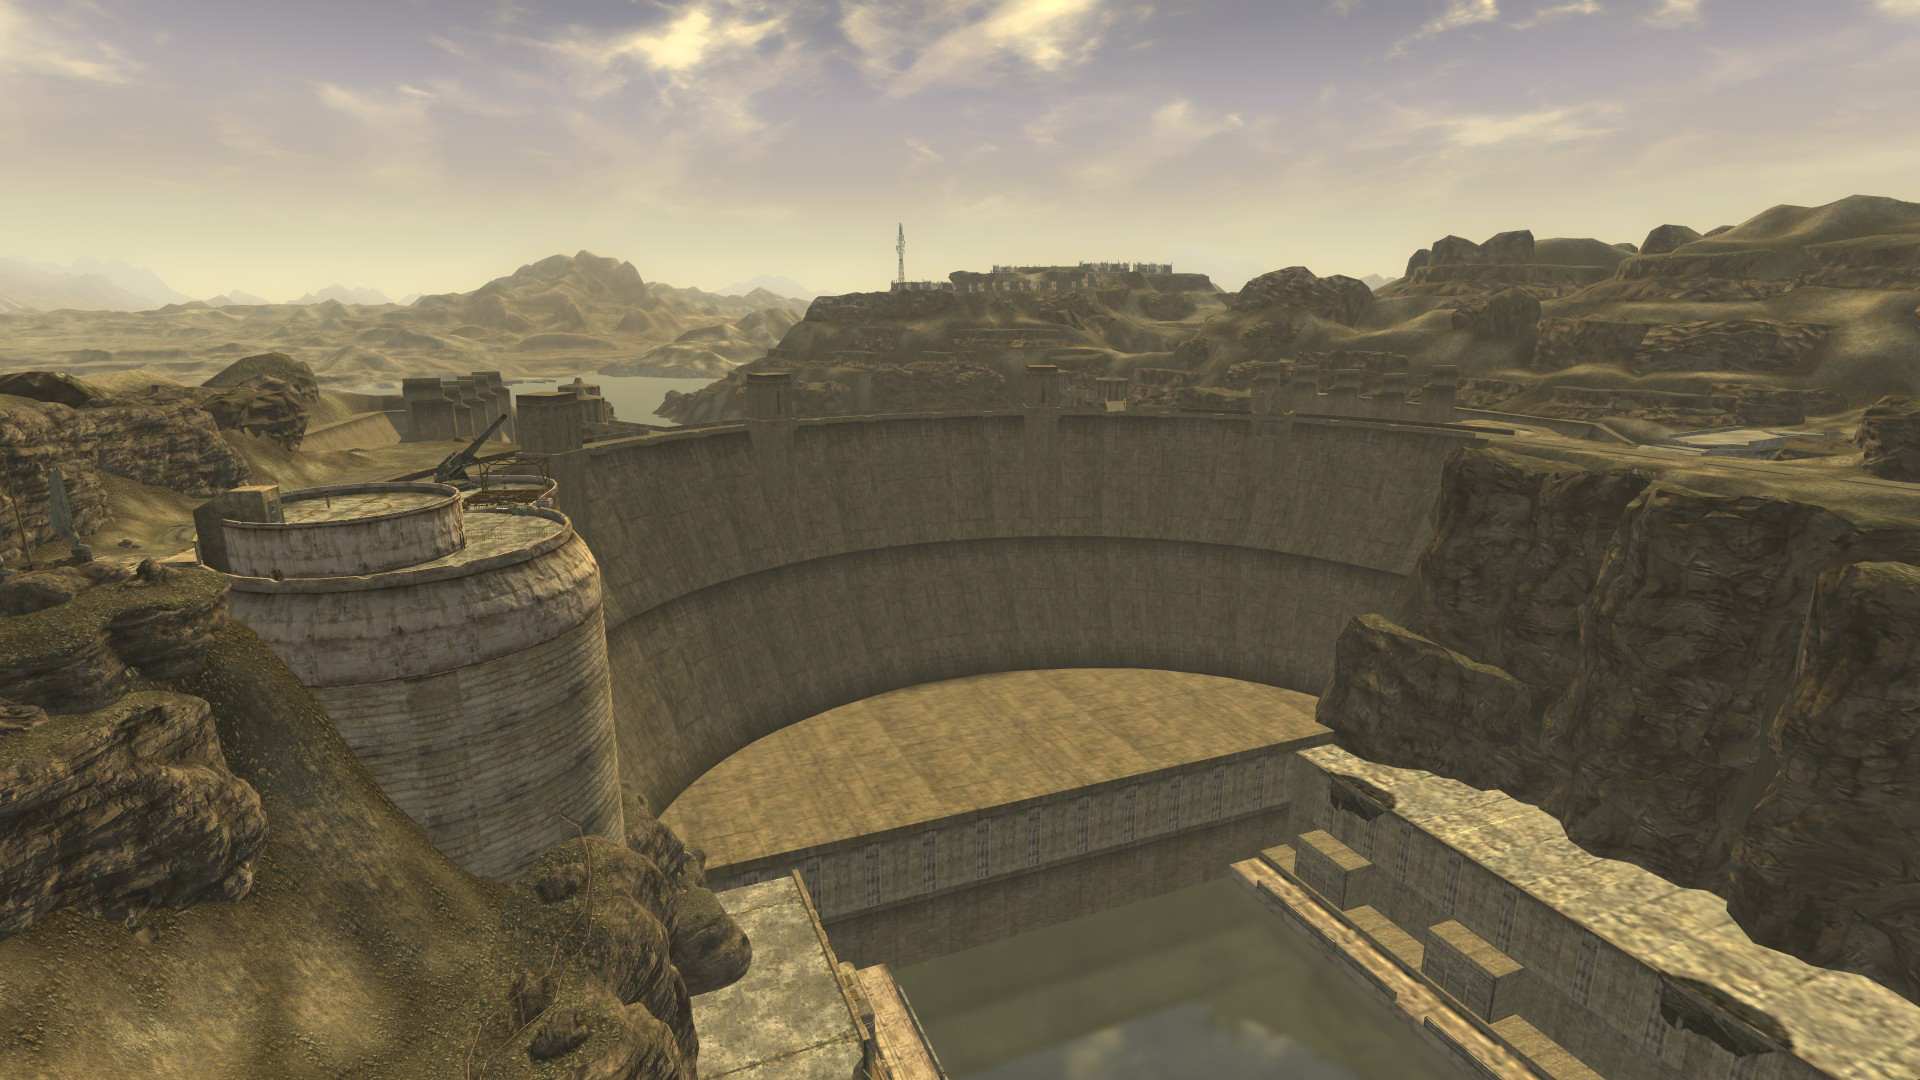 http://img3.wikia.nocookie.net/__cb20110220025122/fallout/images/f/fb/Hoover_Dam_aerial_view.jpg